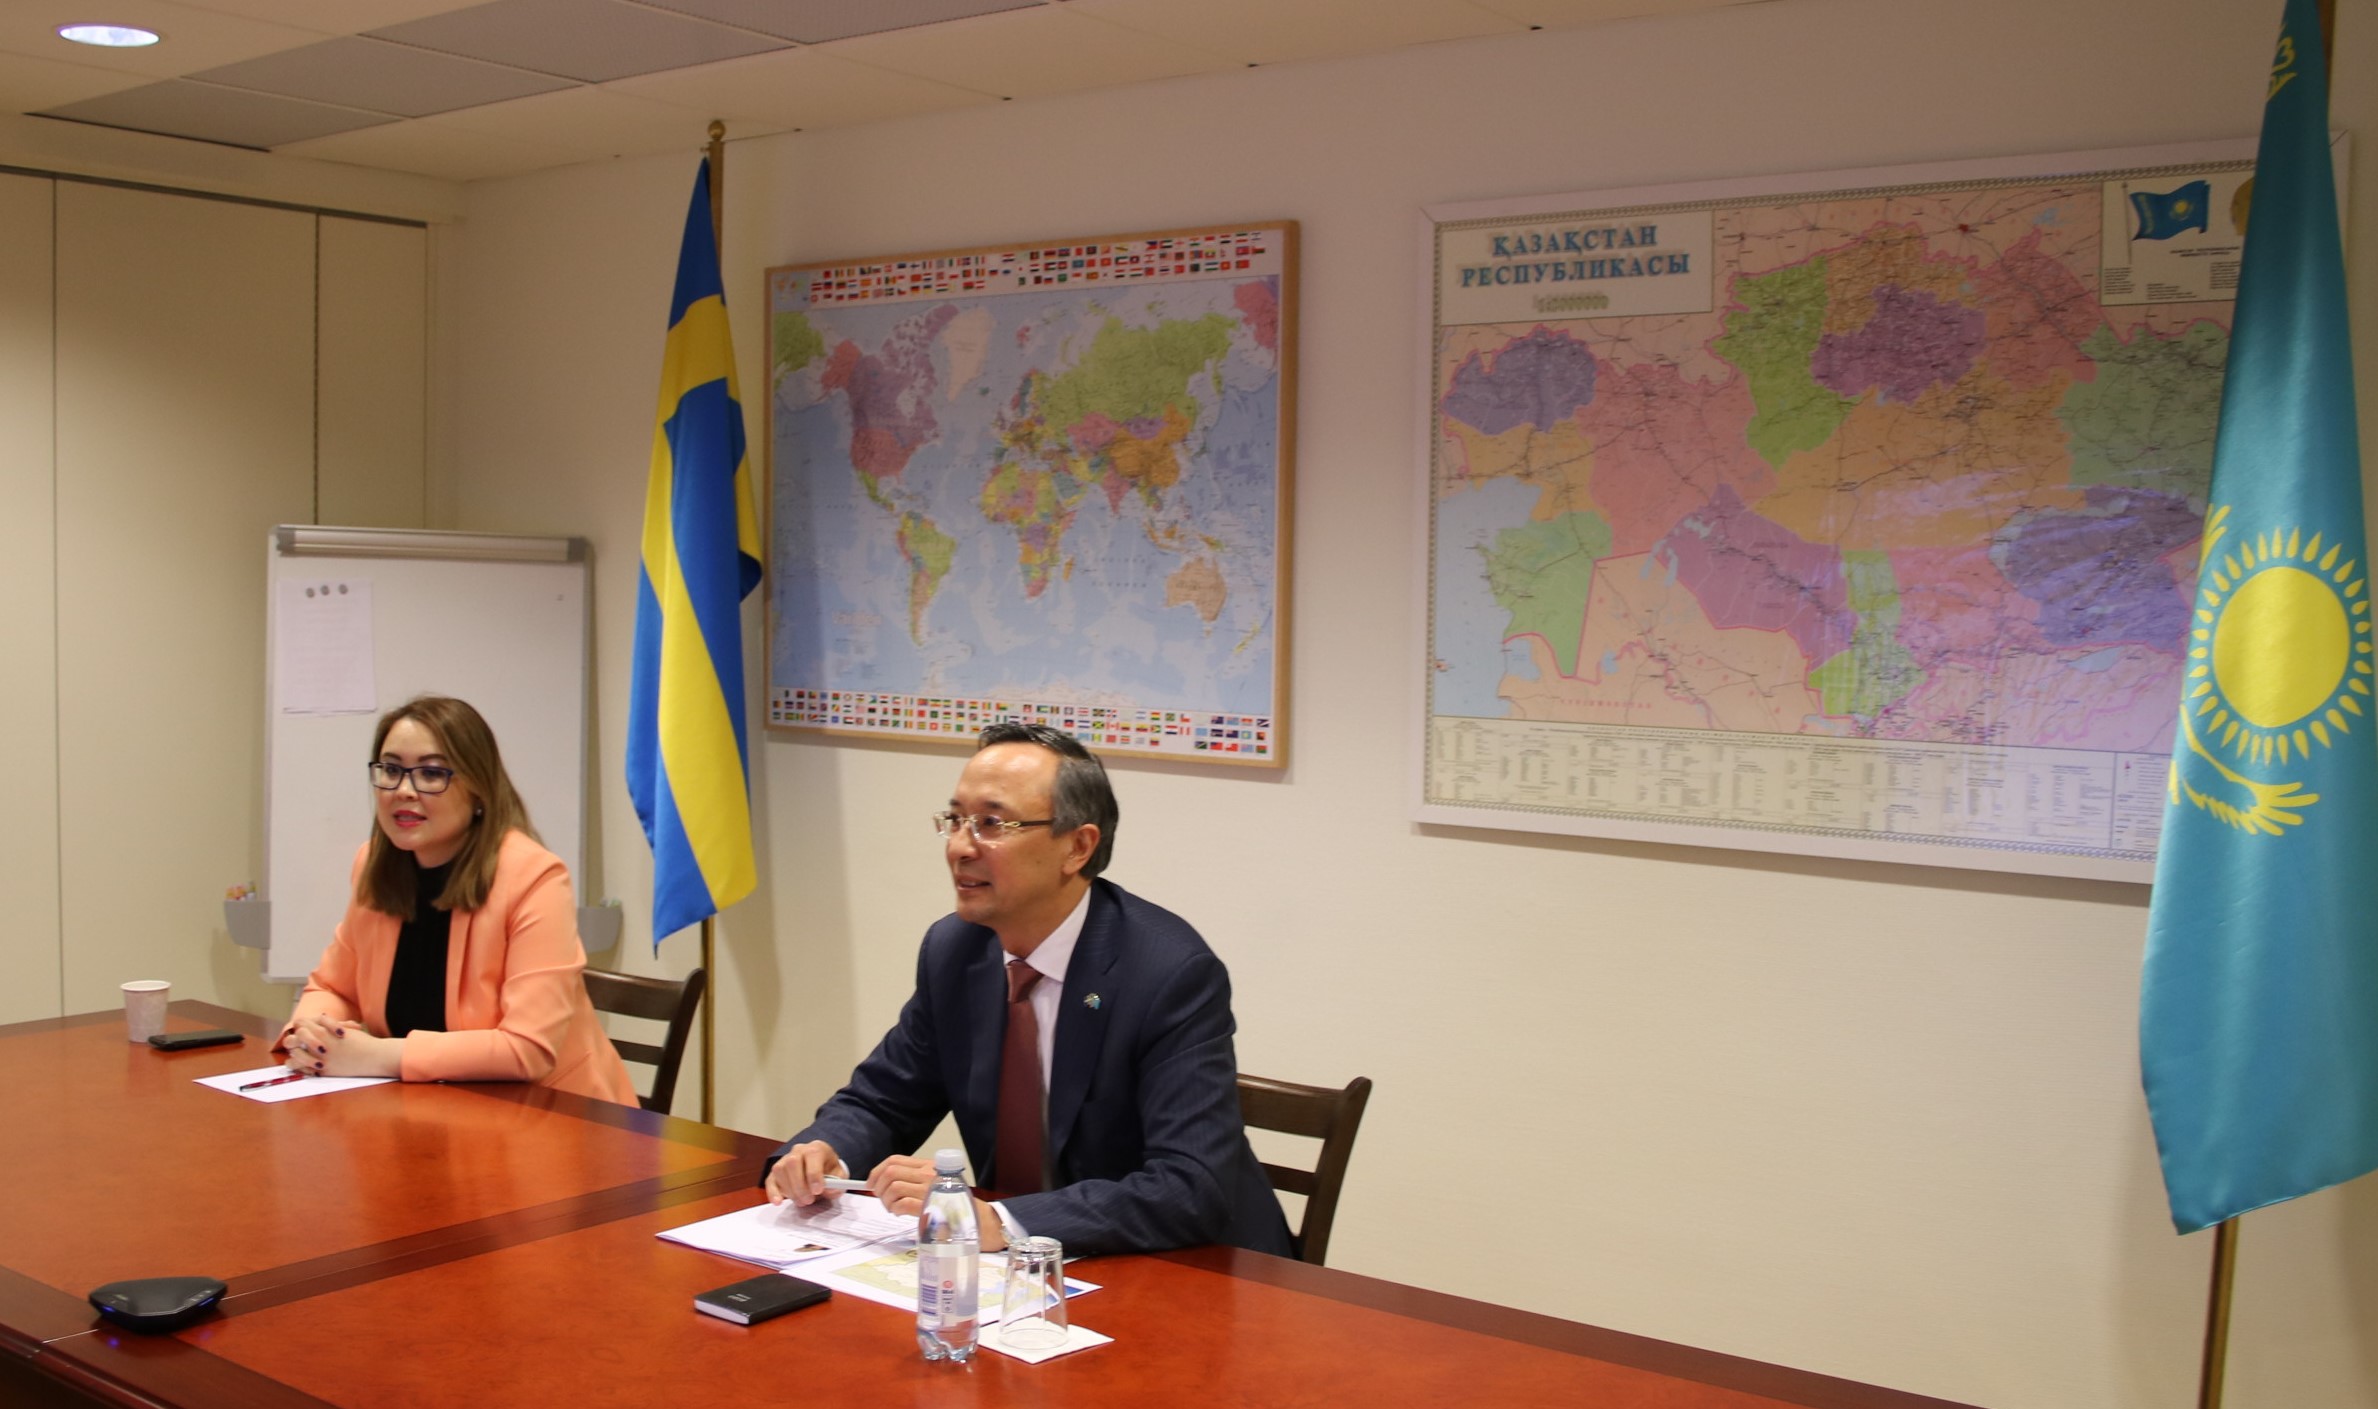 The Friendship Association with the Parliaments of Central Asia has been established in the Riksdag of Sweden